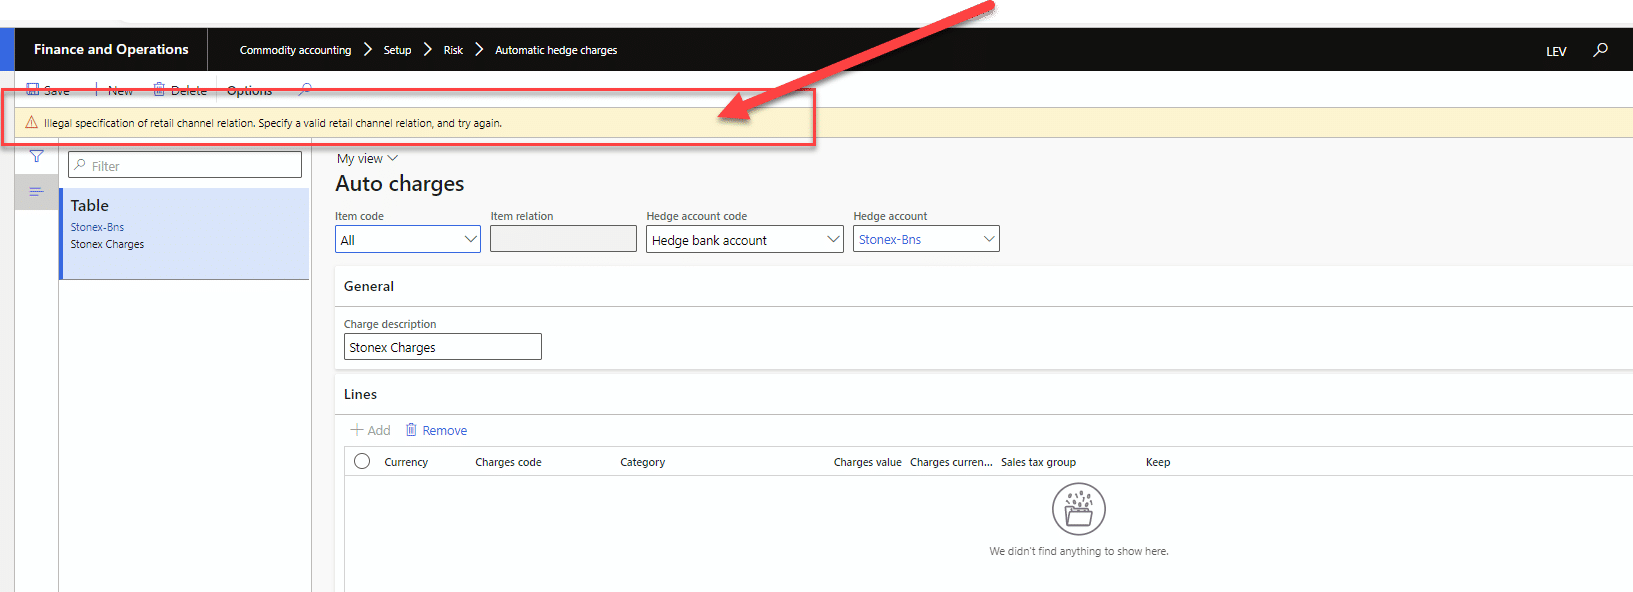 Screenshot from Microsoft Dynamics 365 Finance and Operations with Levridge. A warning message saying “Illegal specification of retail channel relation. Specify a valid retail channel relation, and try again.” is circled in red with a red arrow pointing to it.